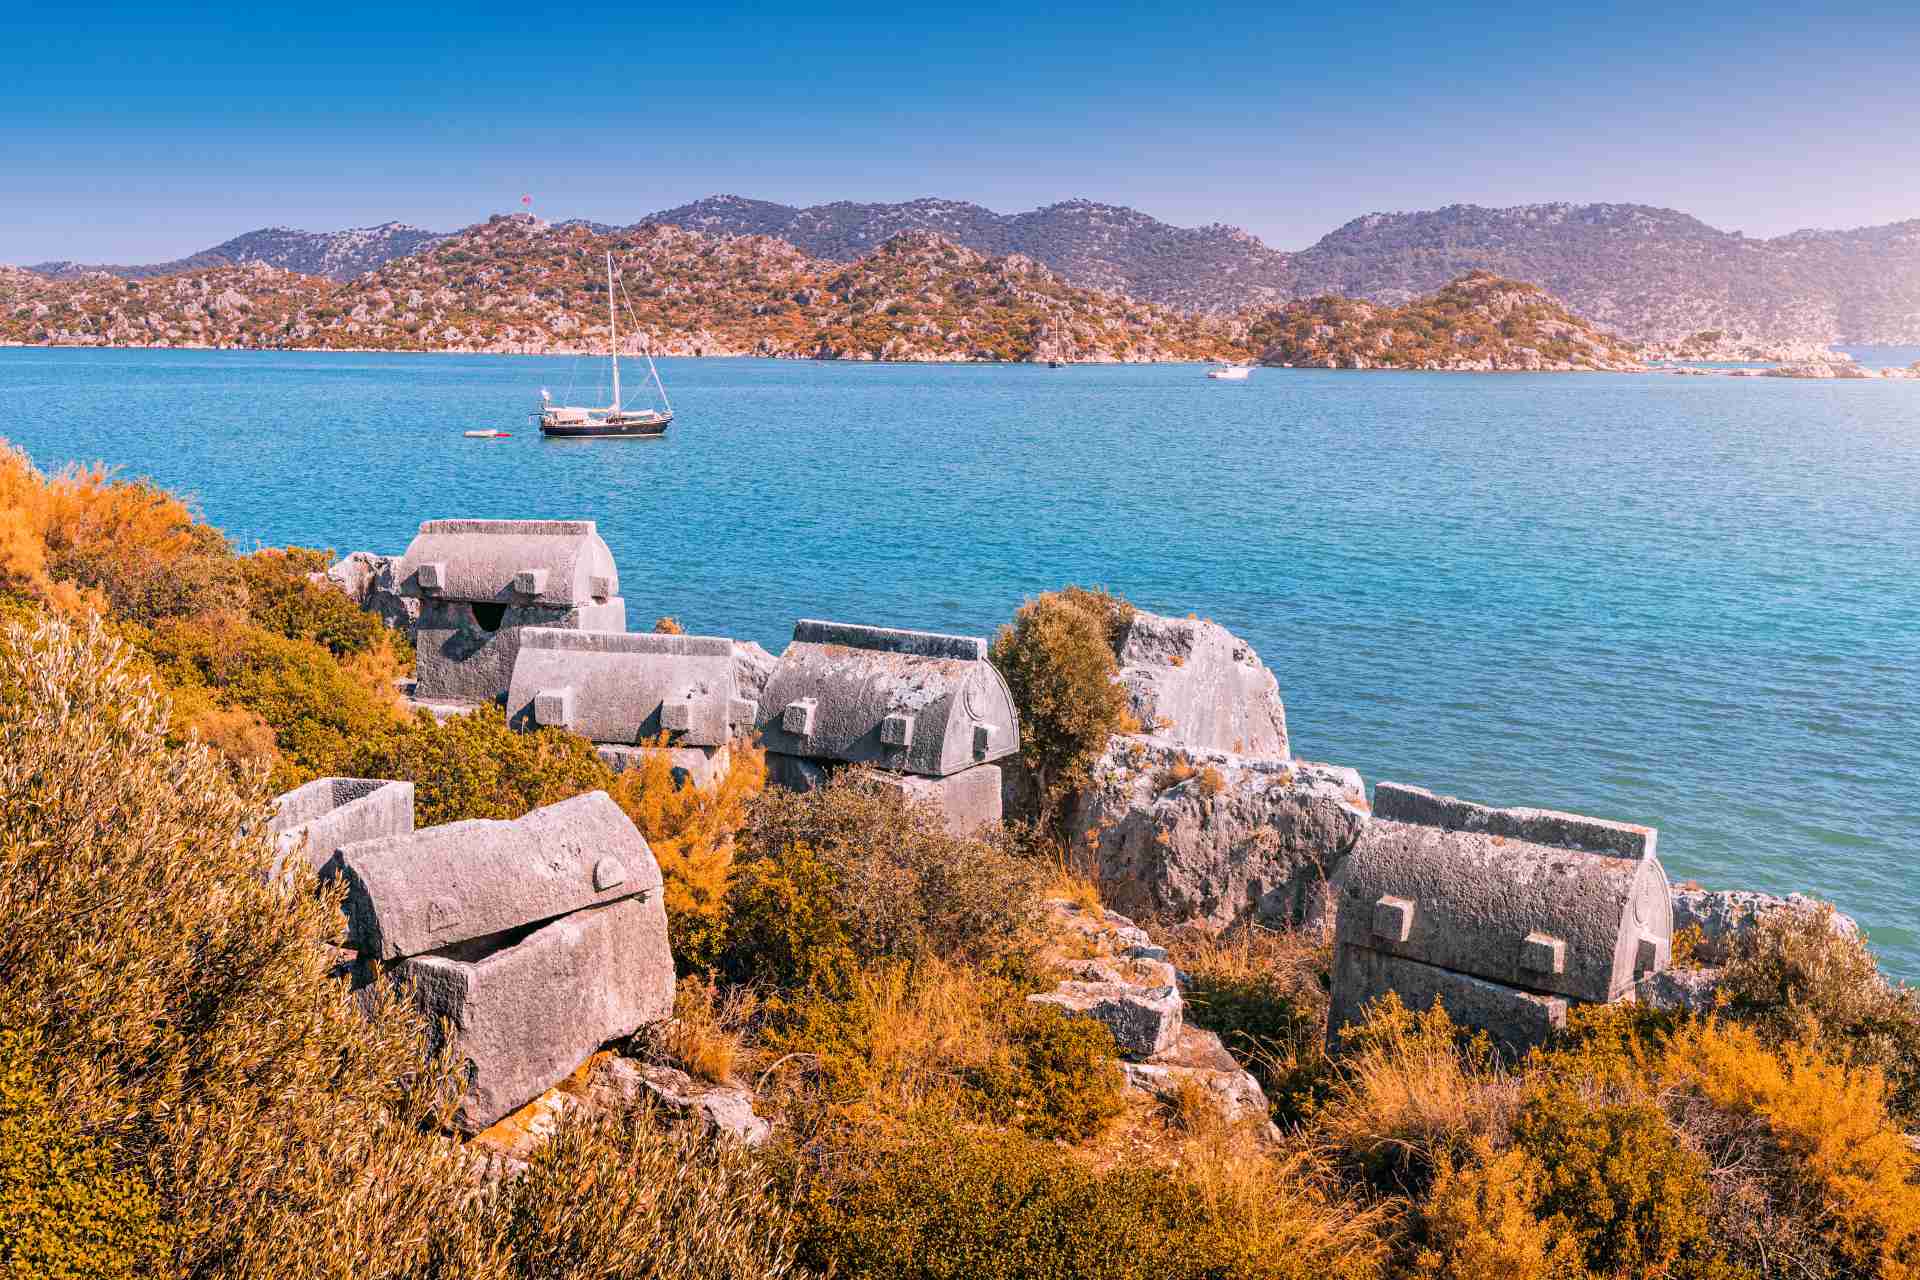 Discover the Magic of the Lycian Coast with Our Exclusive Cruise